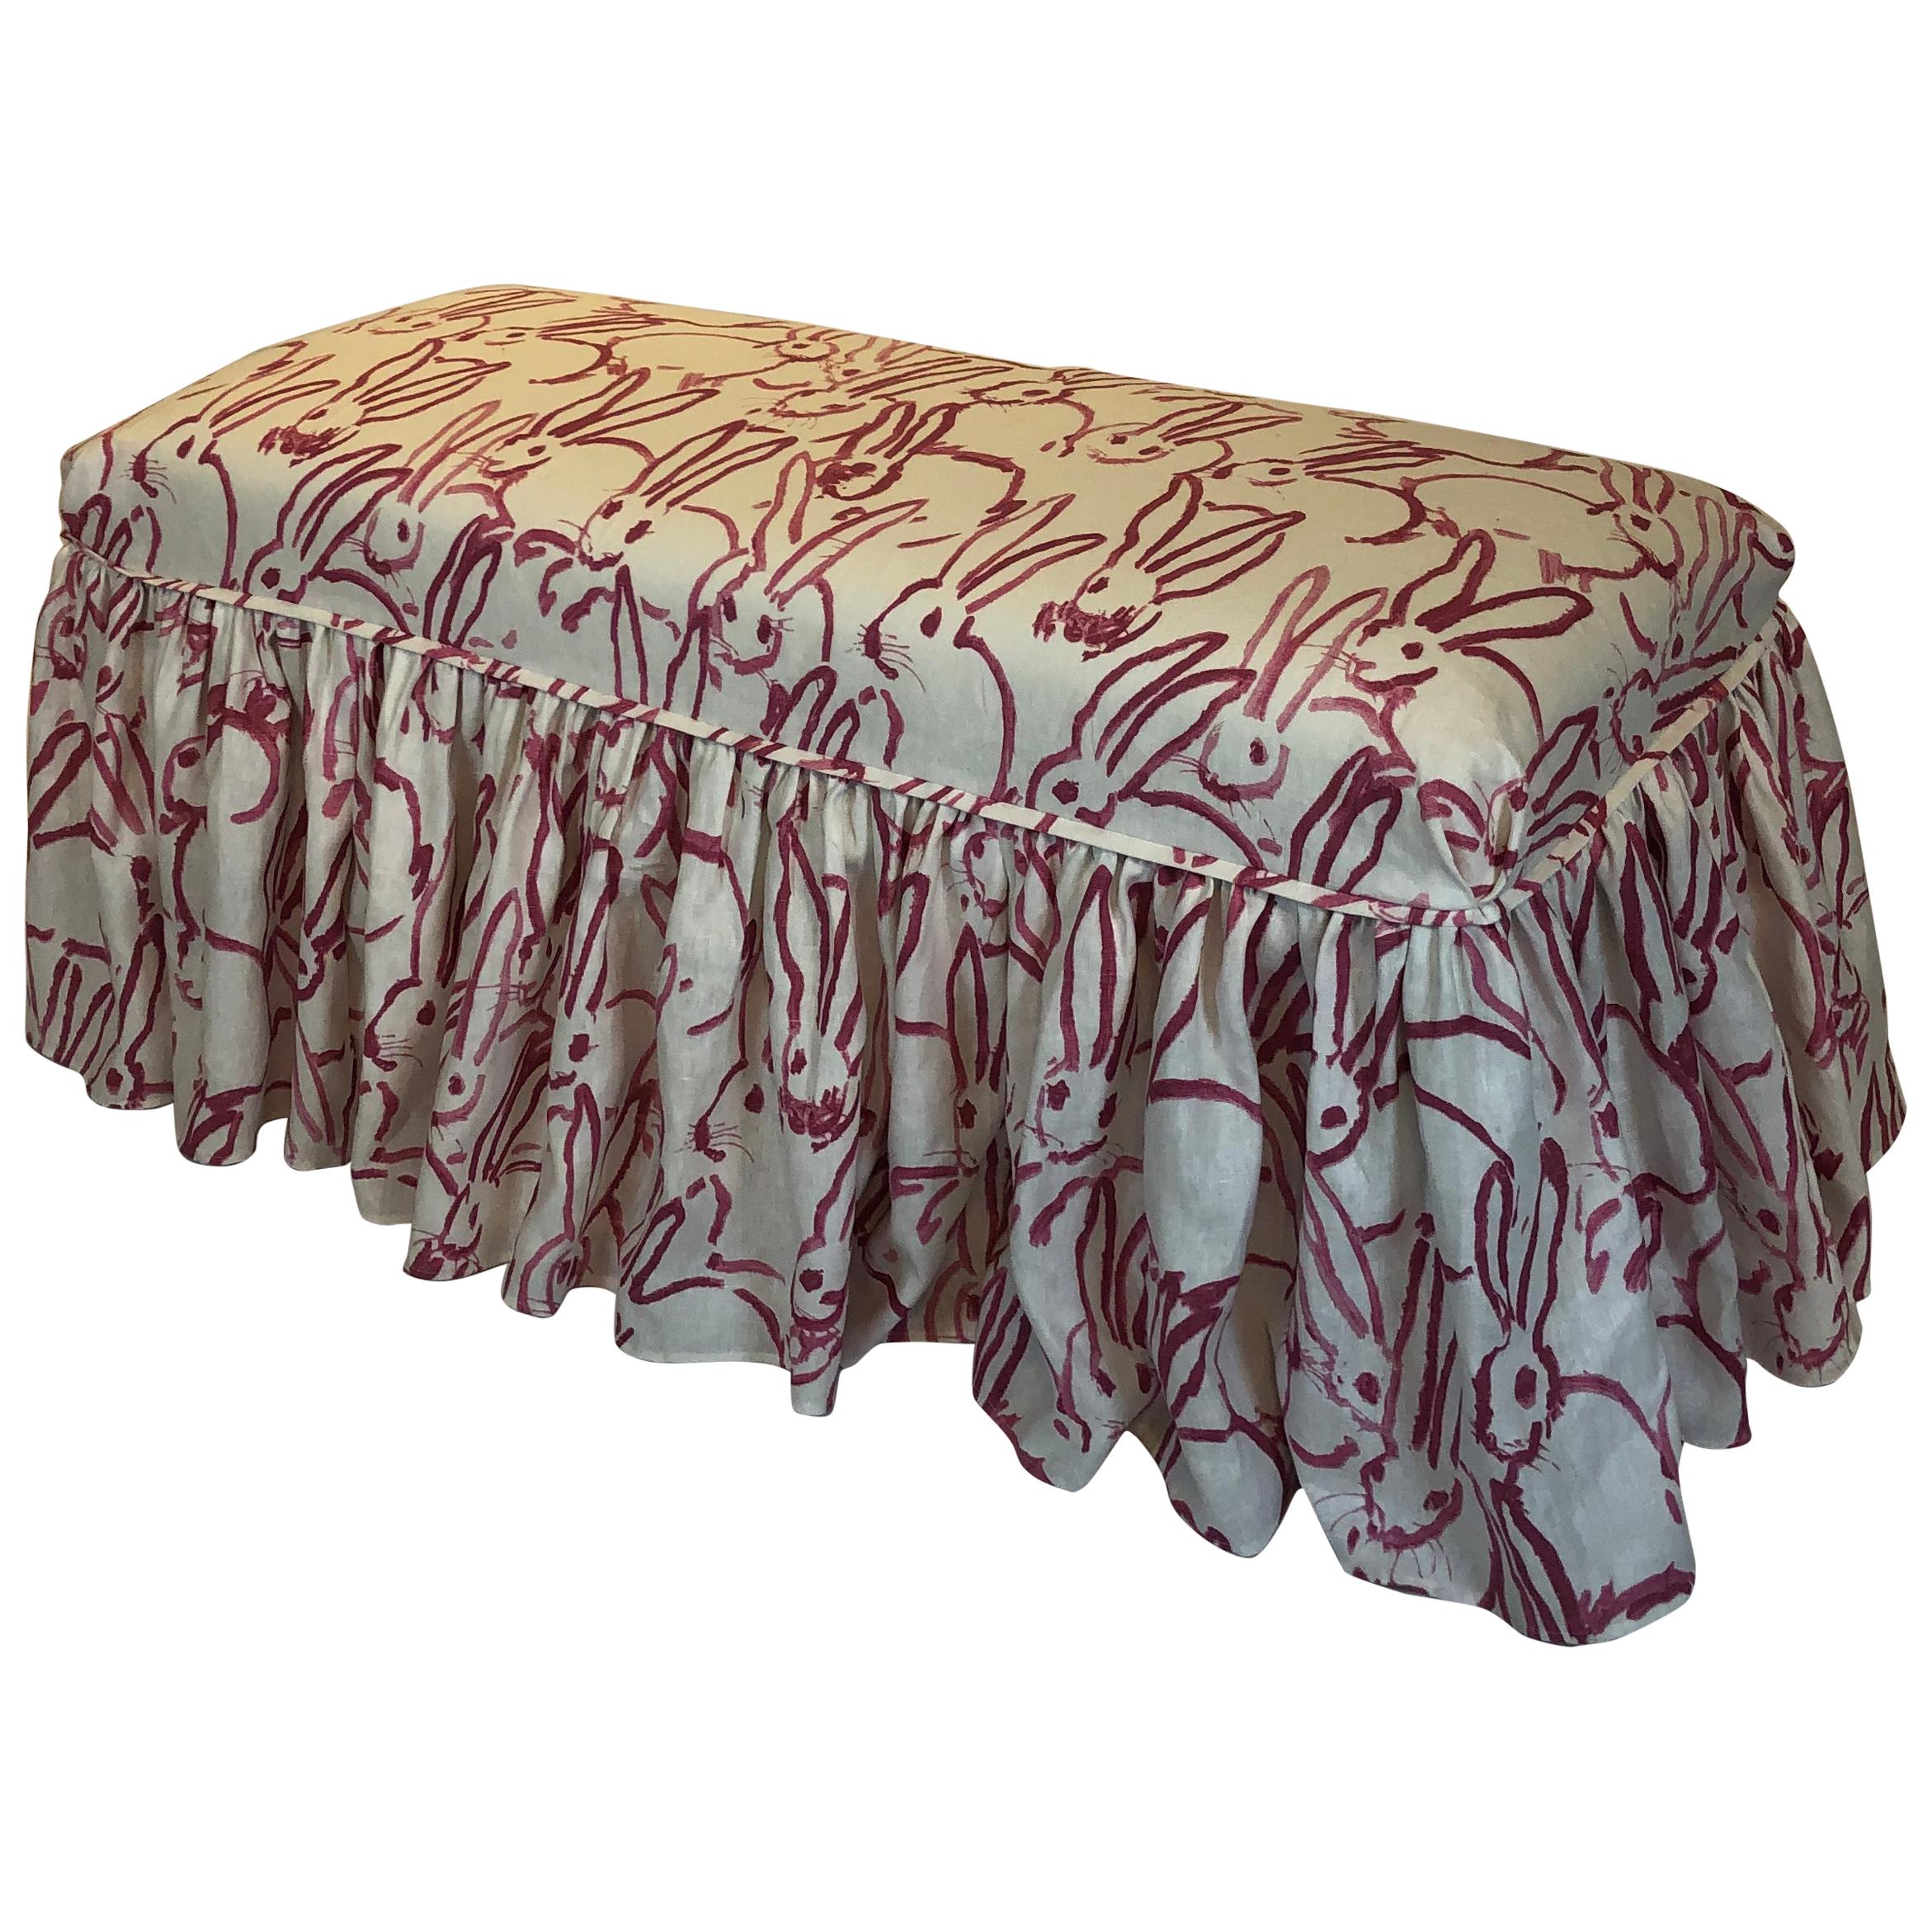 French Style Bench with Hunt Slonem Hutch Print Fabric Slipcover